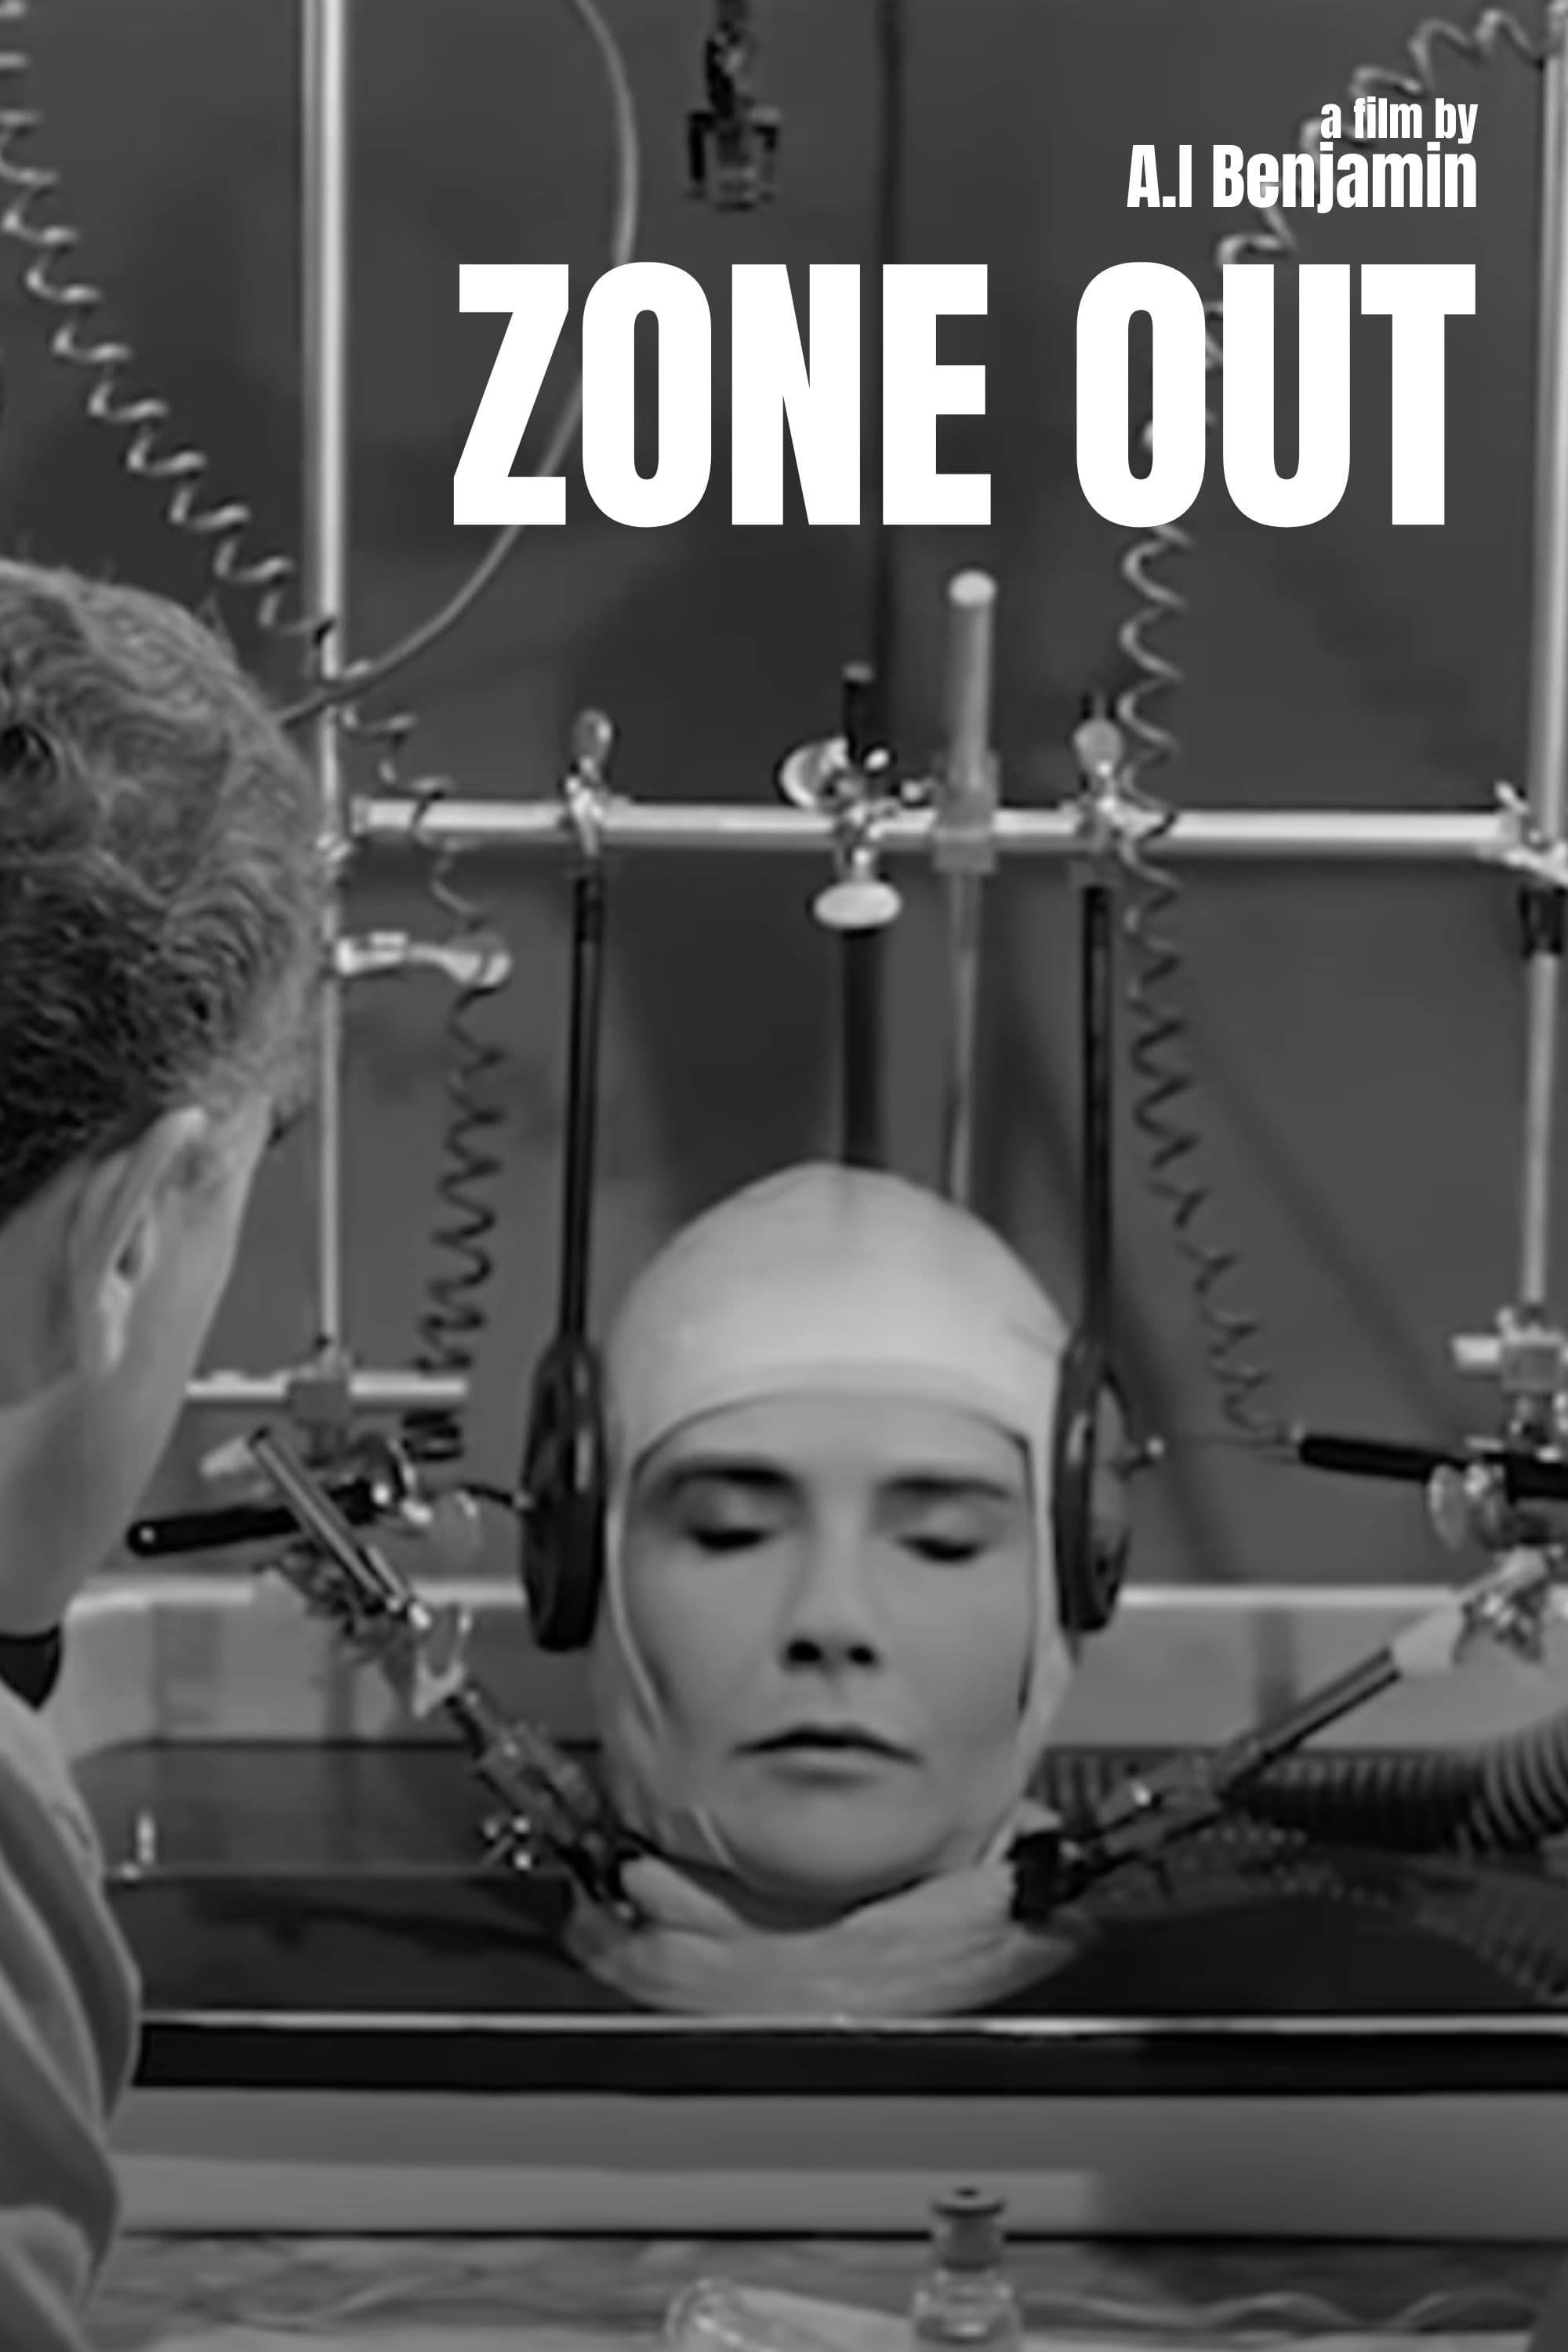 Zone Out poster